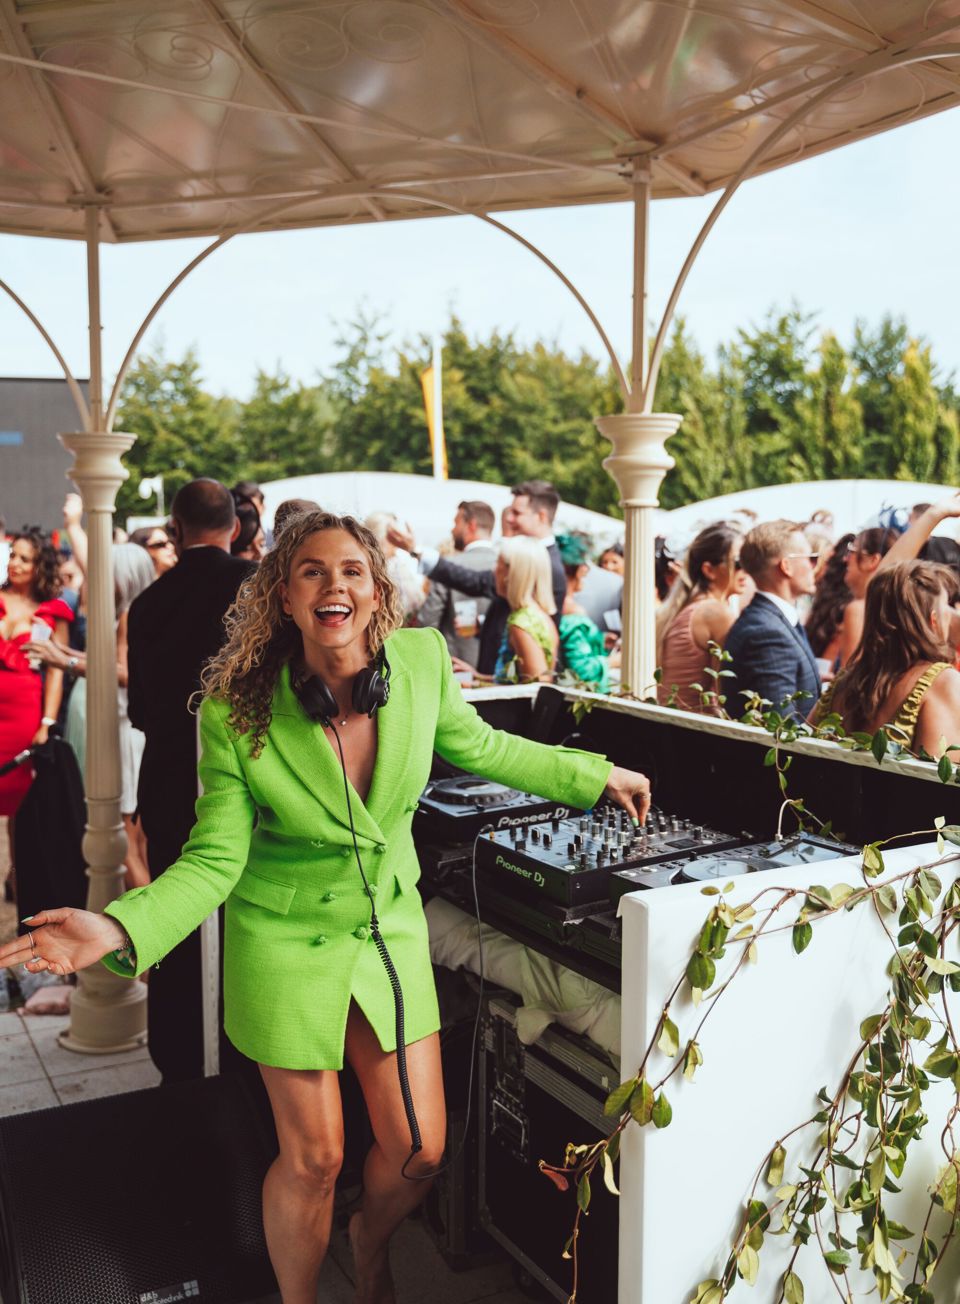 Live music at Goodwood on Thursday - Ladies Day (Pic - Goodwood)